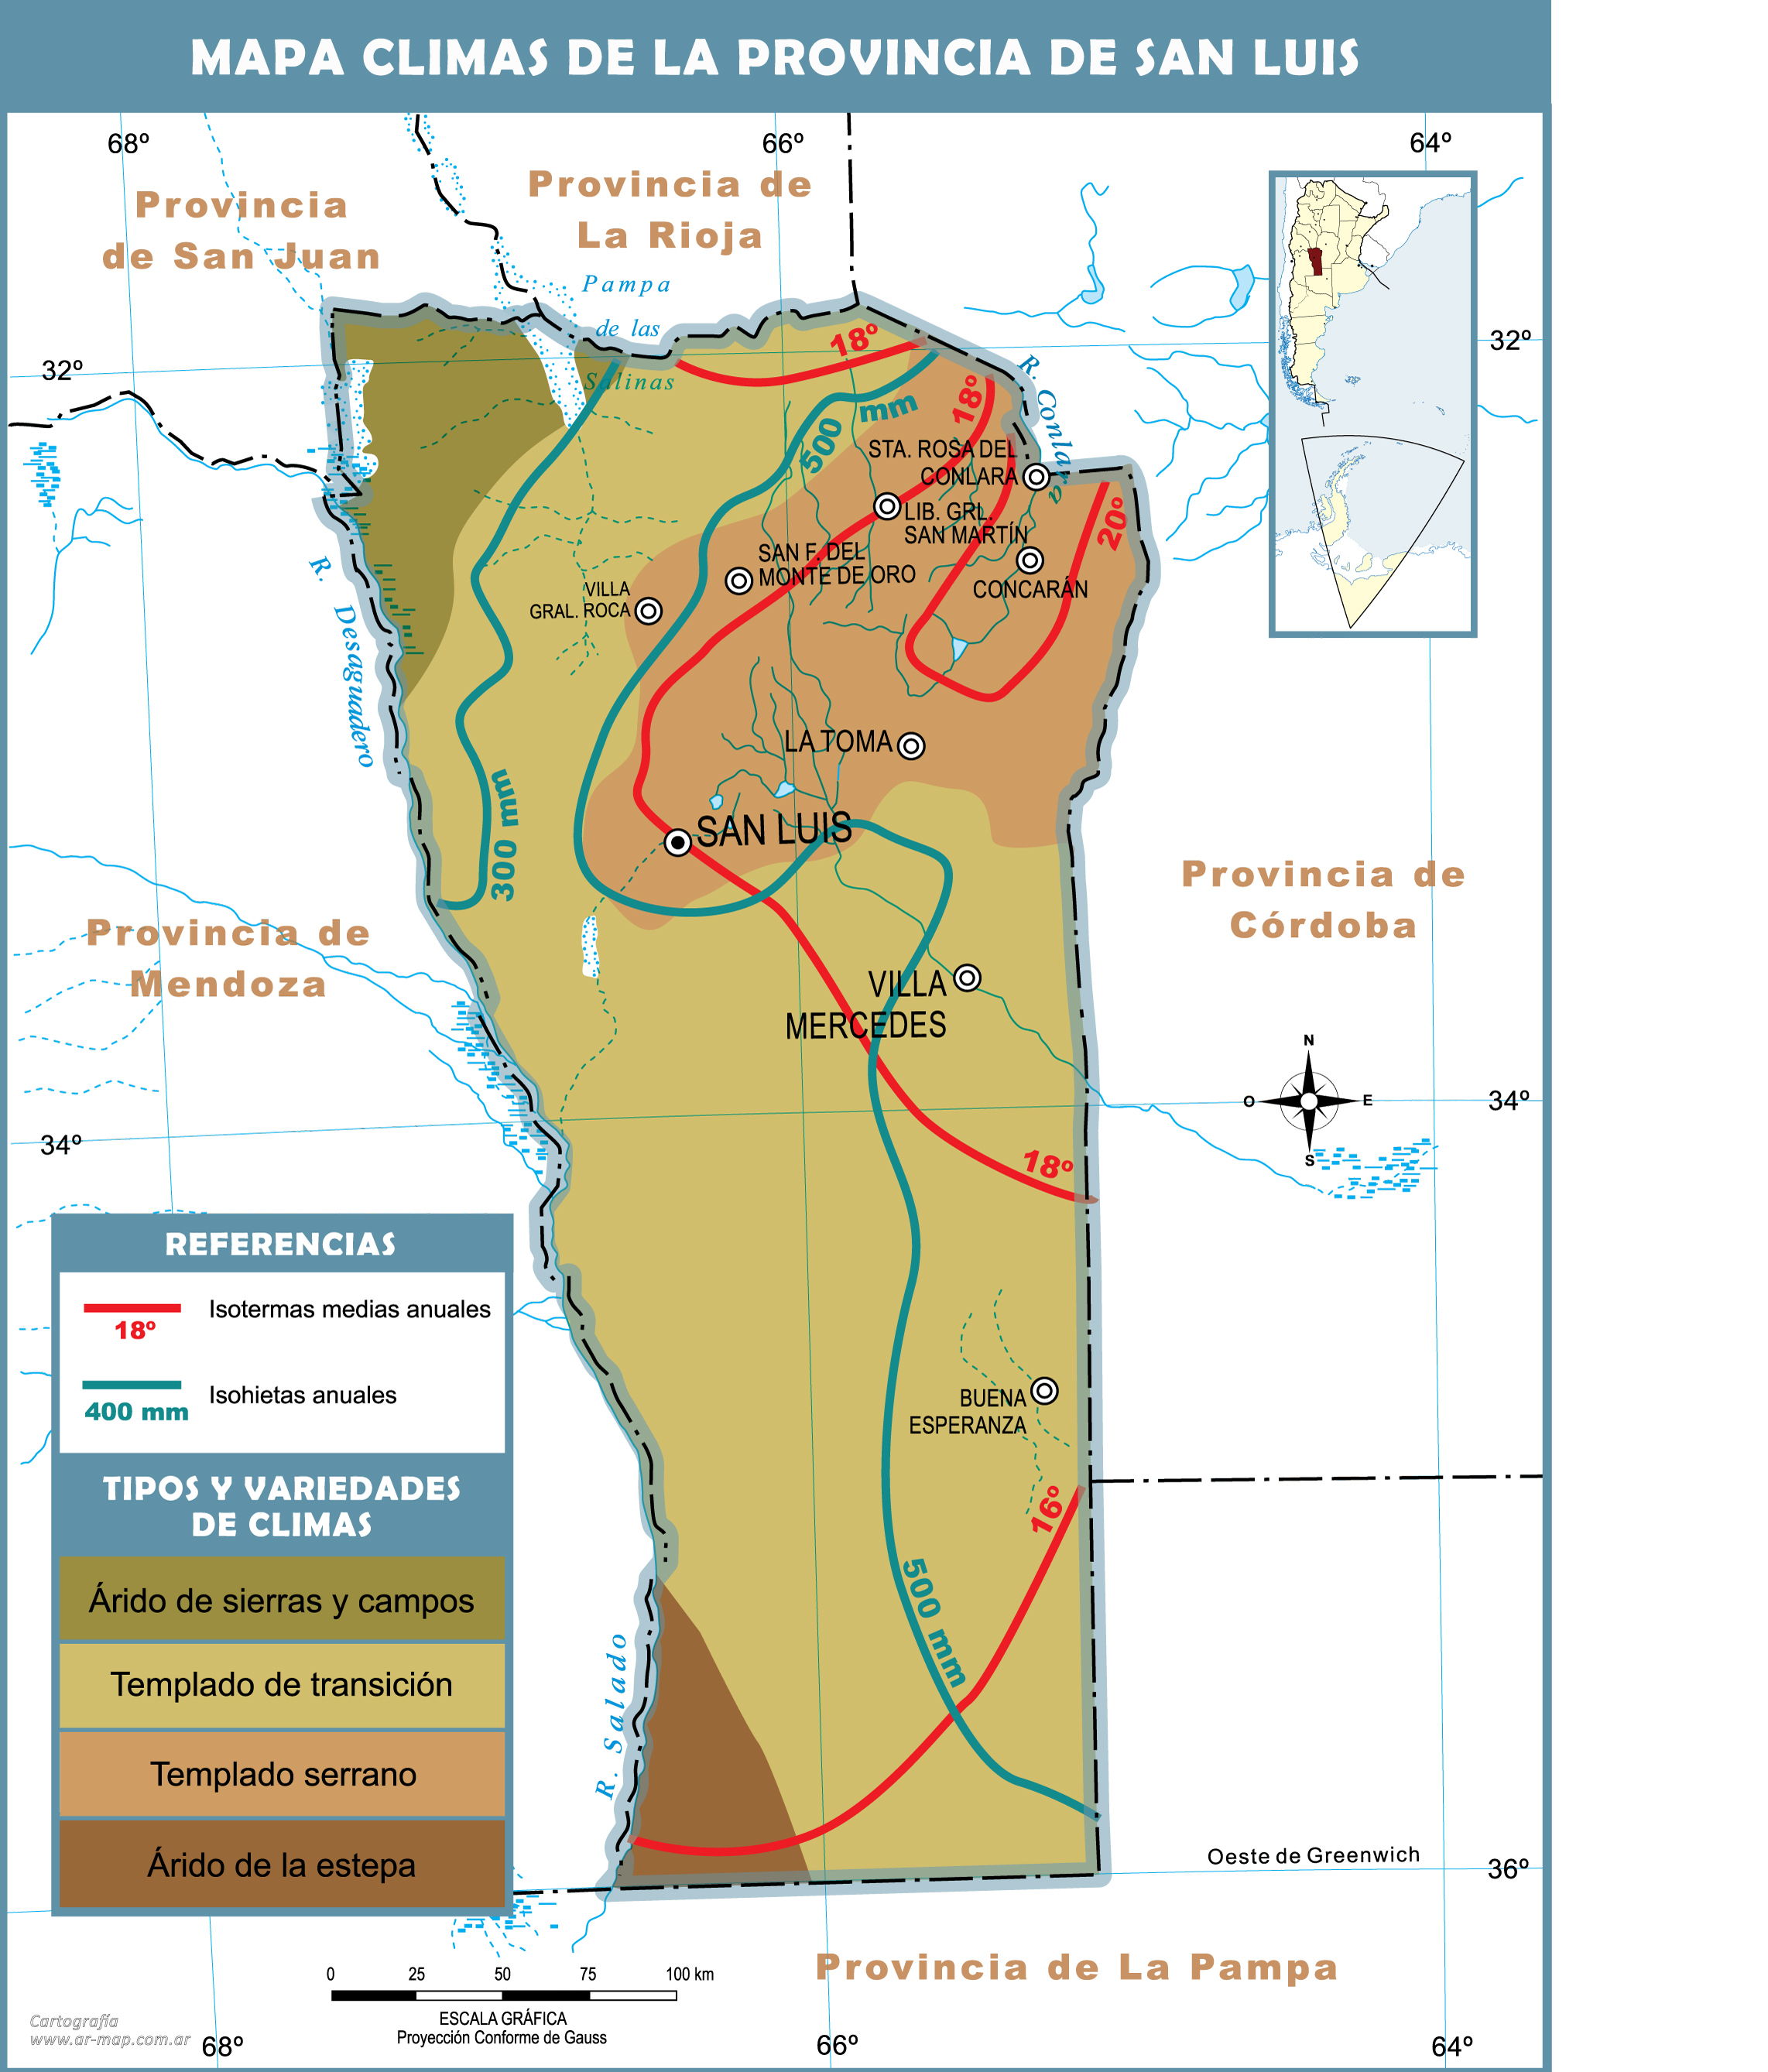 Climatic map of the Province of San Luis, Argentina | Gifex